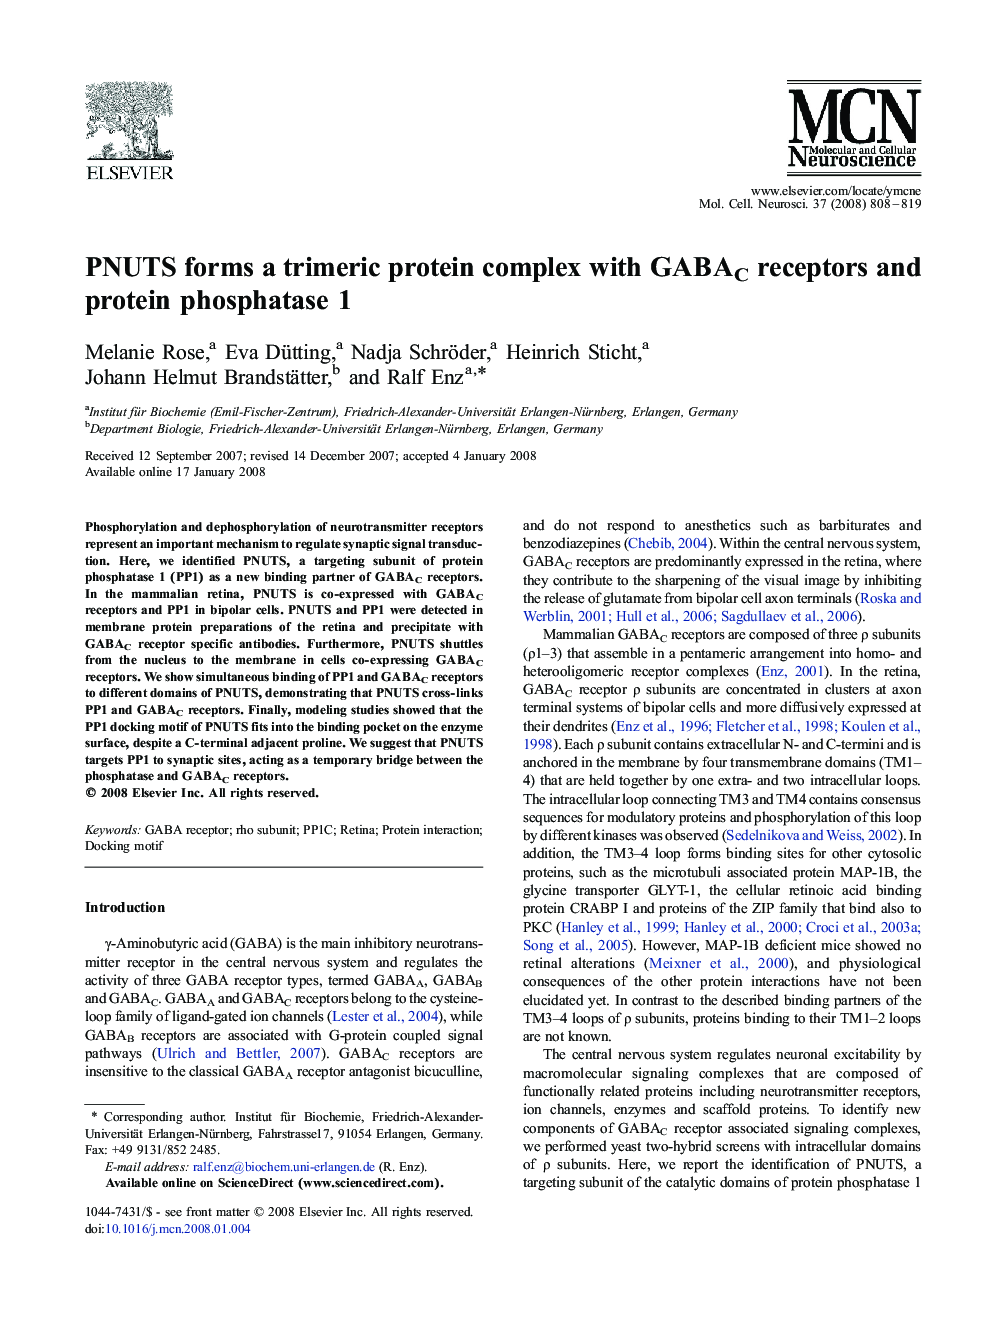 PNUTS forms a trimeric protein complex with GABAC receptors and protein phosphatase 1